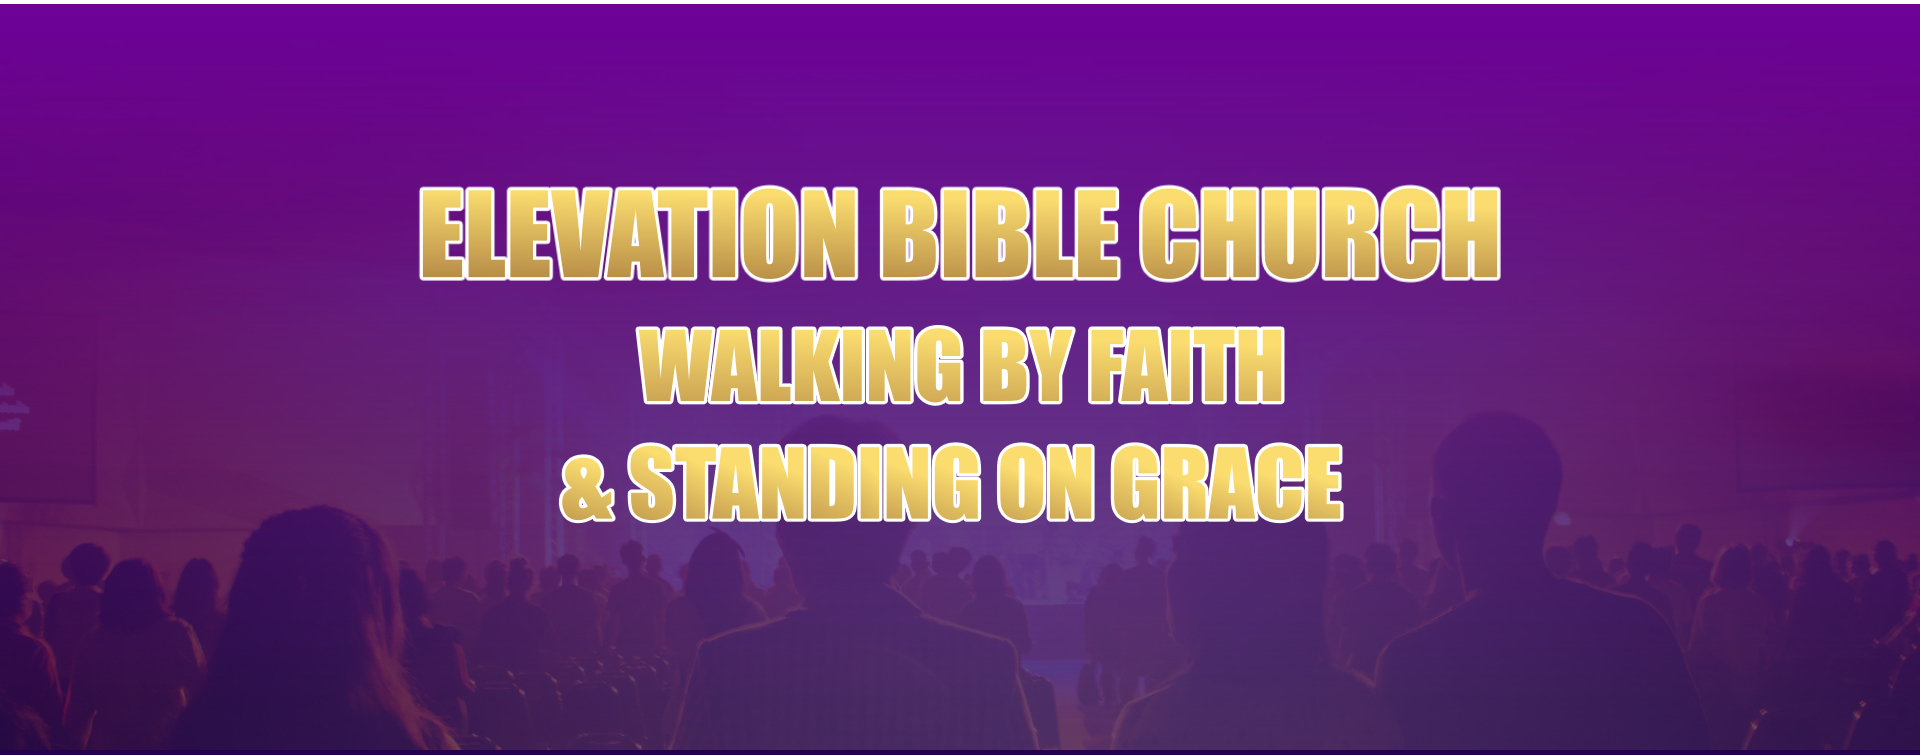 Walking by faith and standing on grace